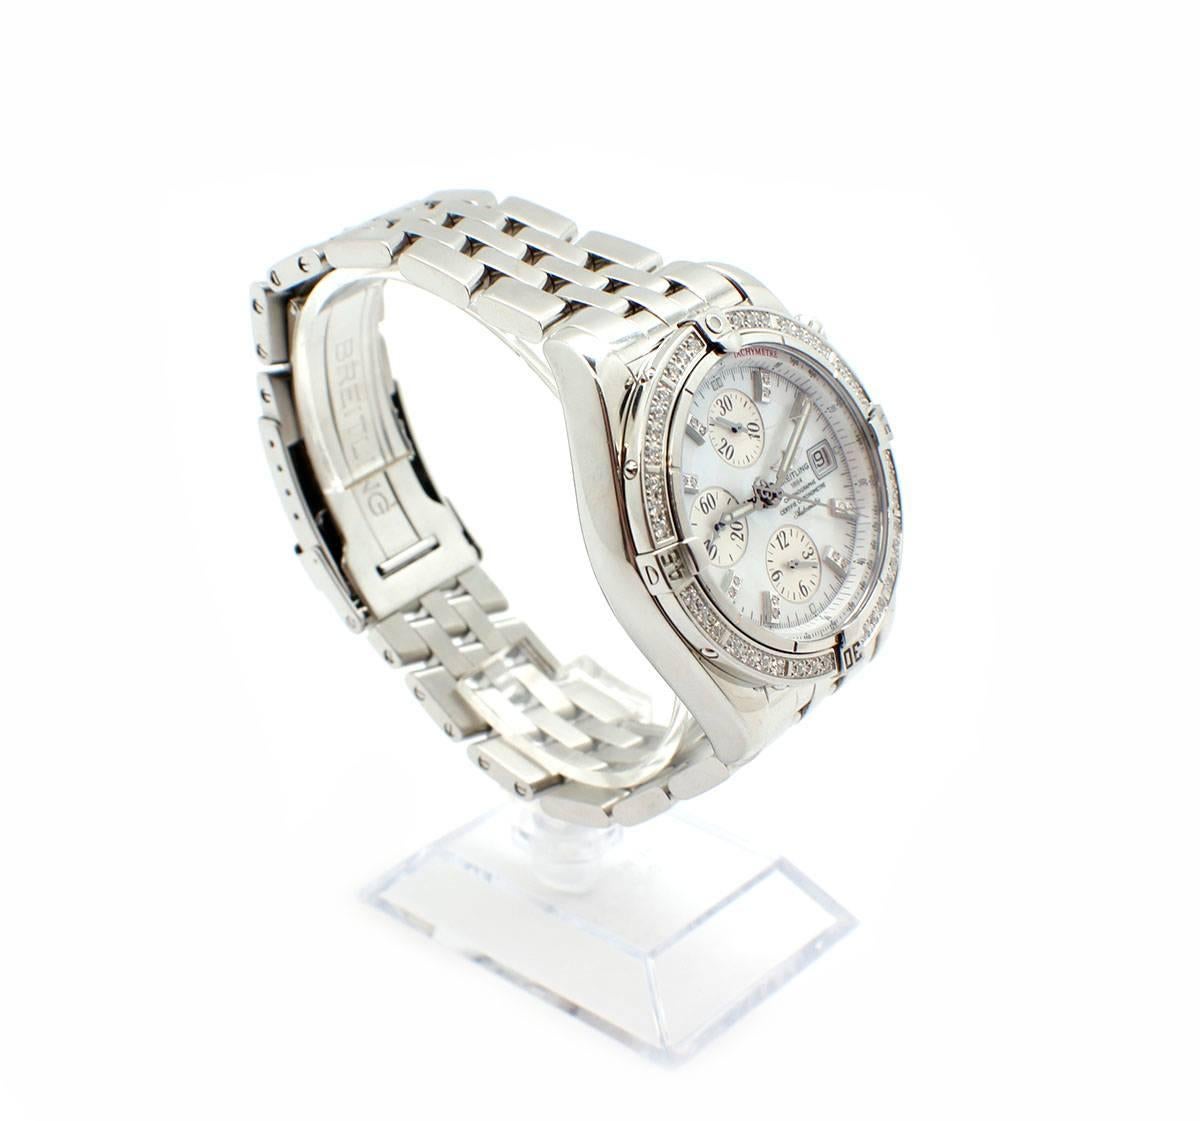 Movement: automatic
Function: hours, minutes, sub seconds, chronograph, date
Case: 44mm stainless steel case, diamond bezel, sapphire crystal
Band: stainless steel bracelet, steel deployment clasp, fits up to an 8.25-inch wrist
Dial: mother of pearl